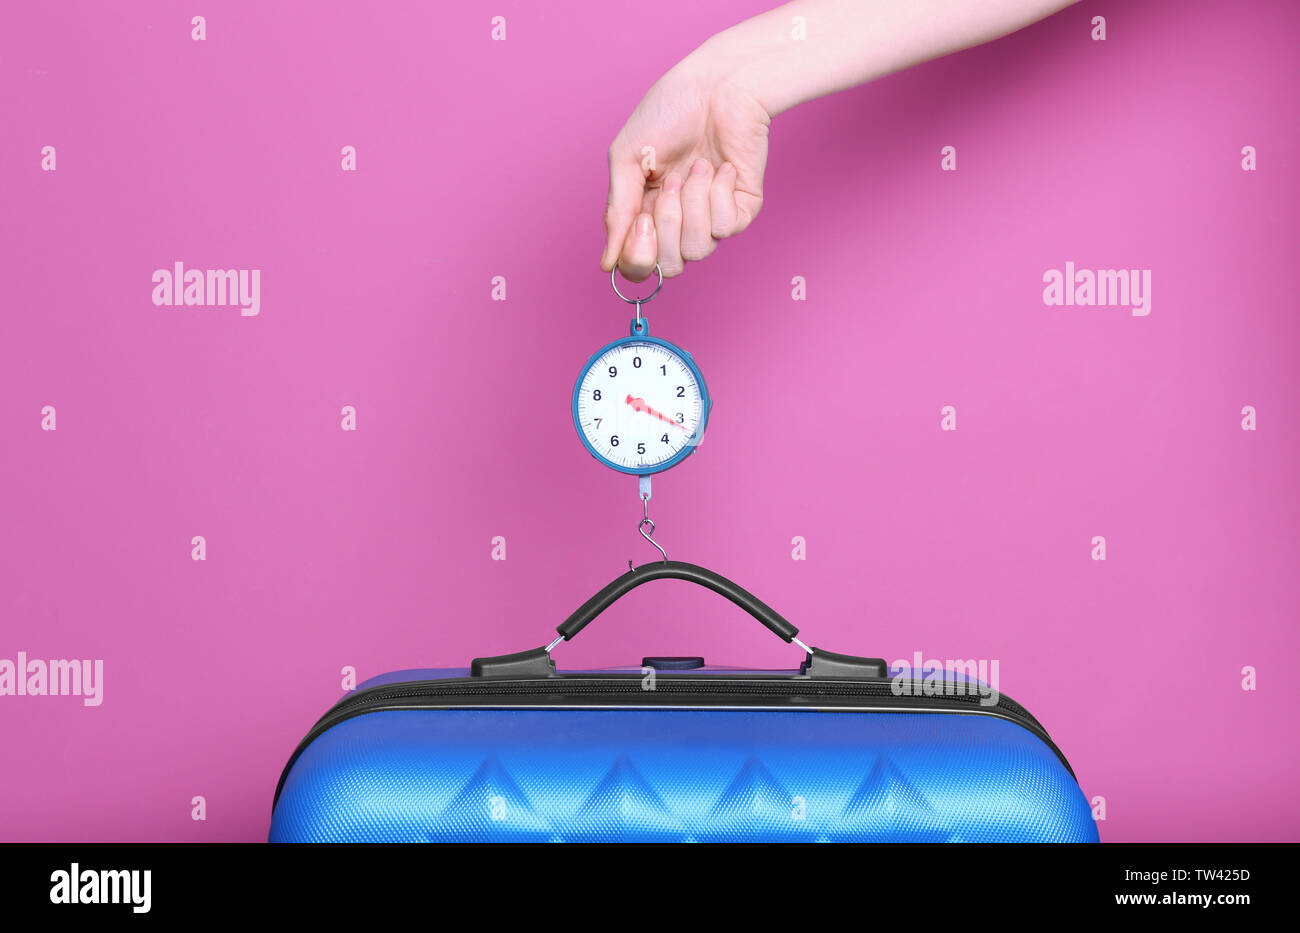 https://c8.alamy.com/comp/TW425D/woman-weighting-heavy-luggage-on-color-background-TW425D.jpg